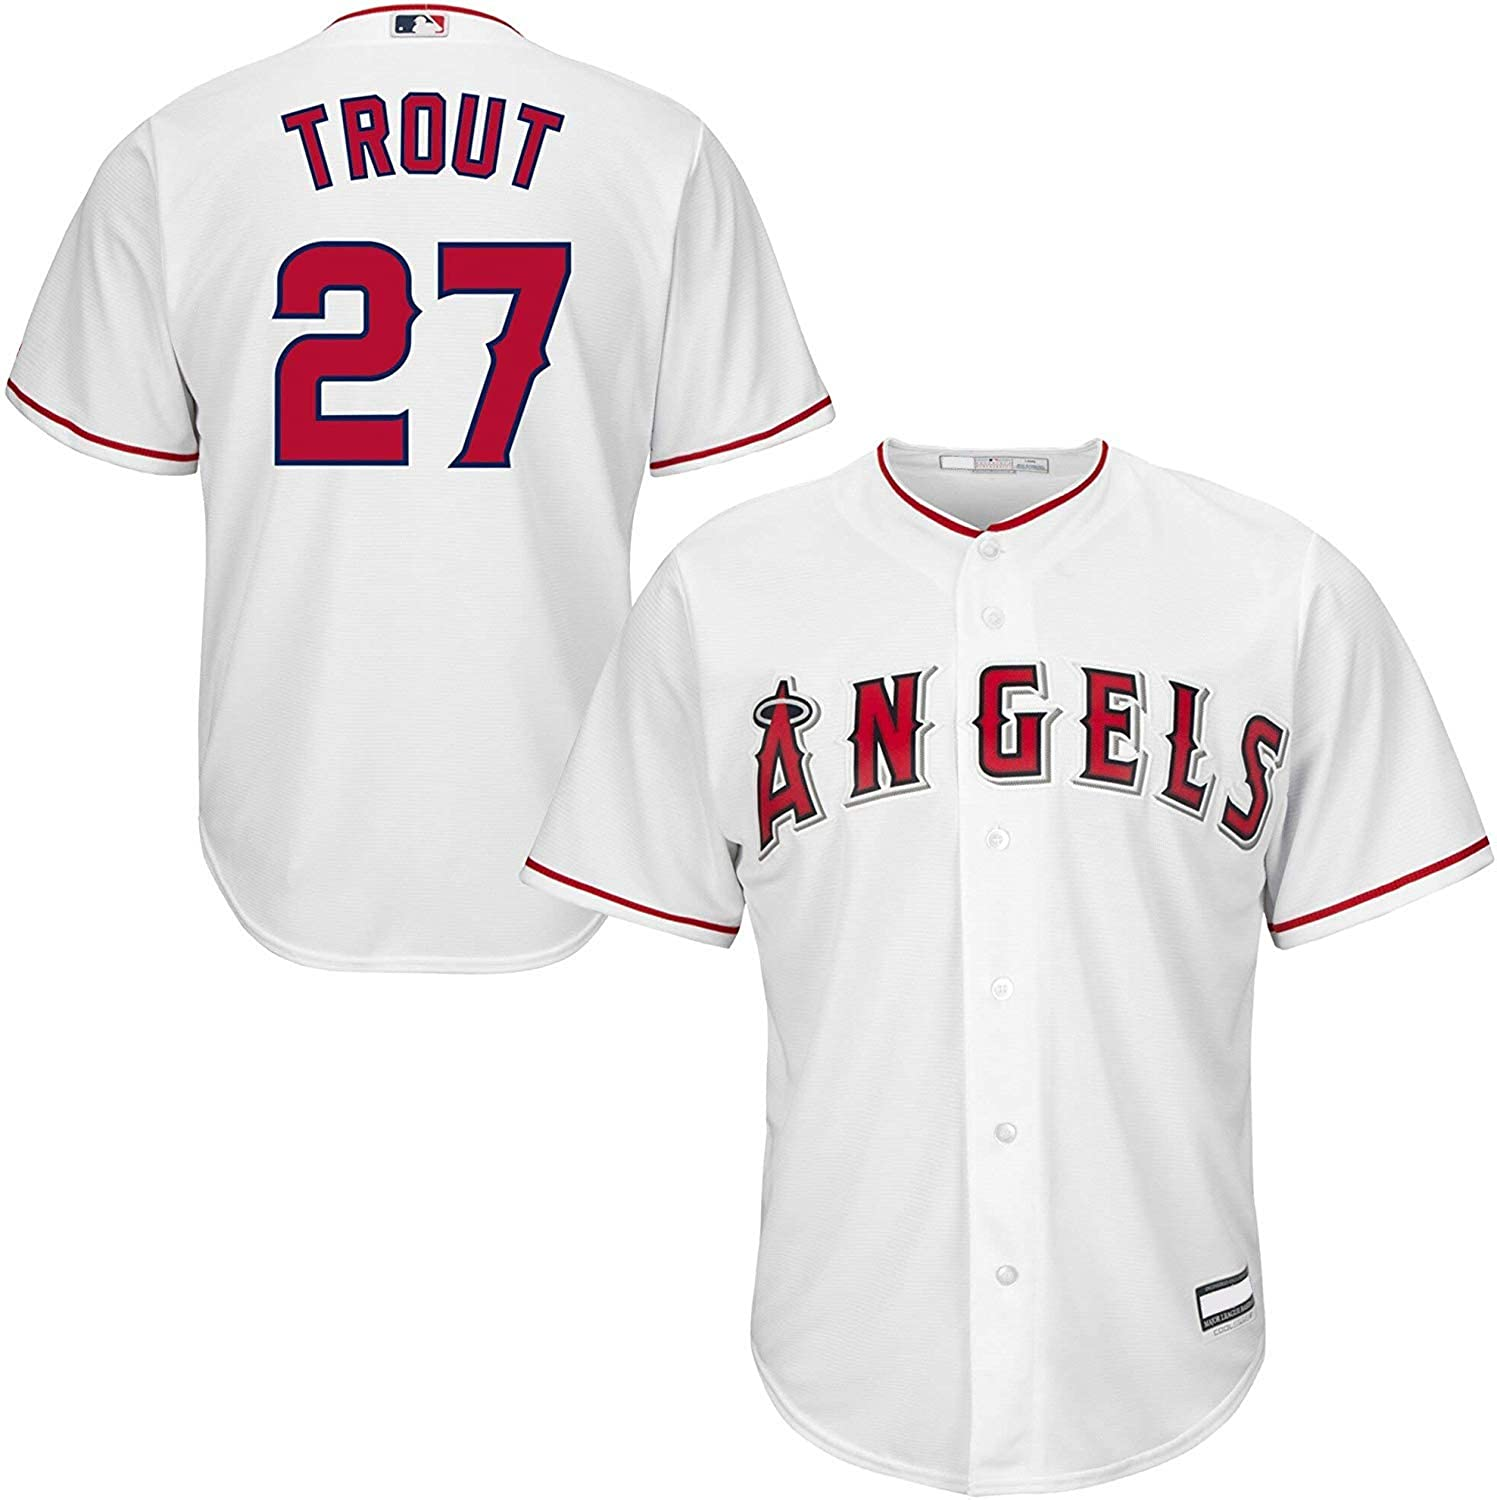 Kids Mike Trout Gifts & Gear, Youth Apparel, Mike Trout Merchandise